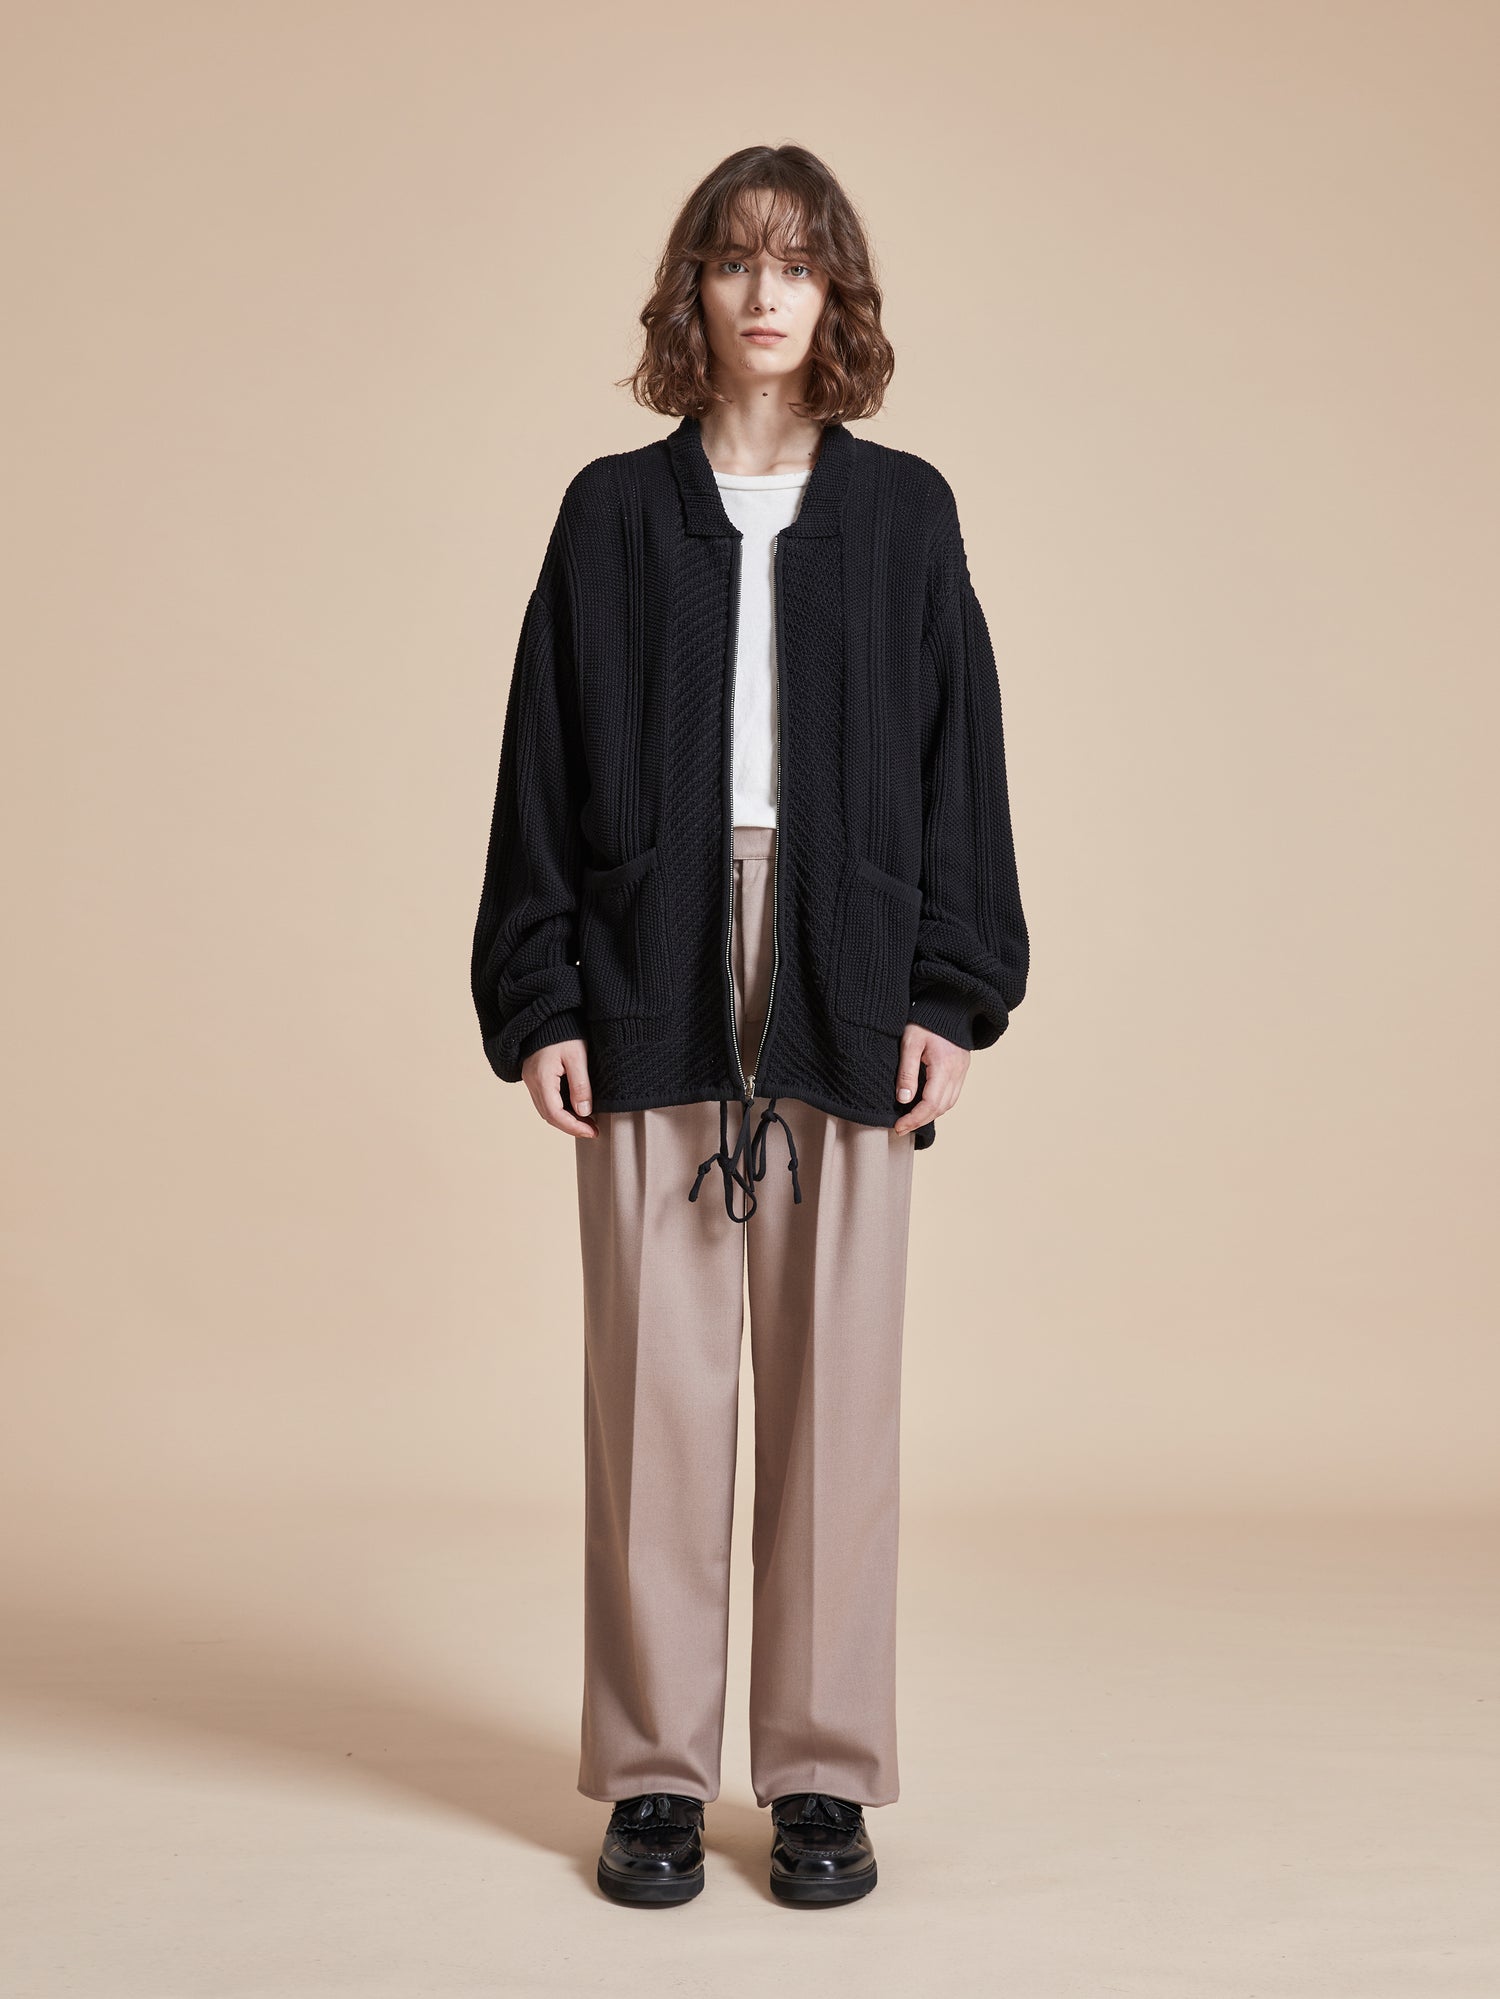 A model wearing a black jacket and beige pants with Found's Zip Up Panel Knit Ribbed Sweater.